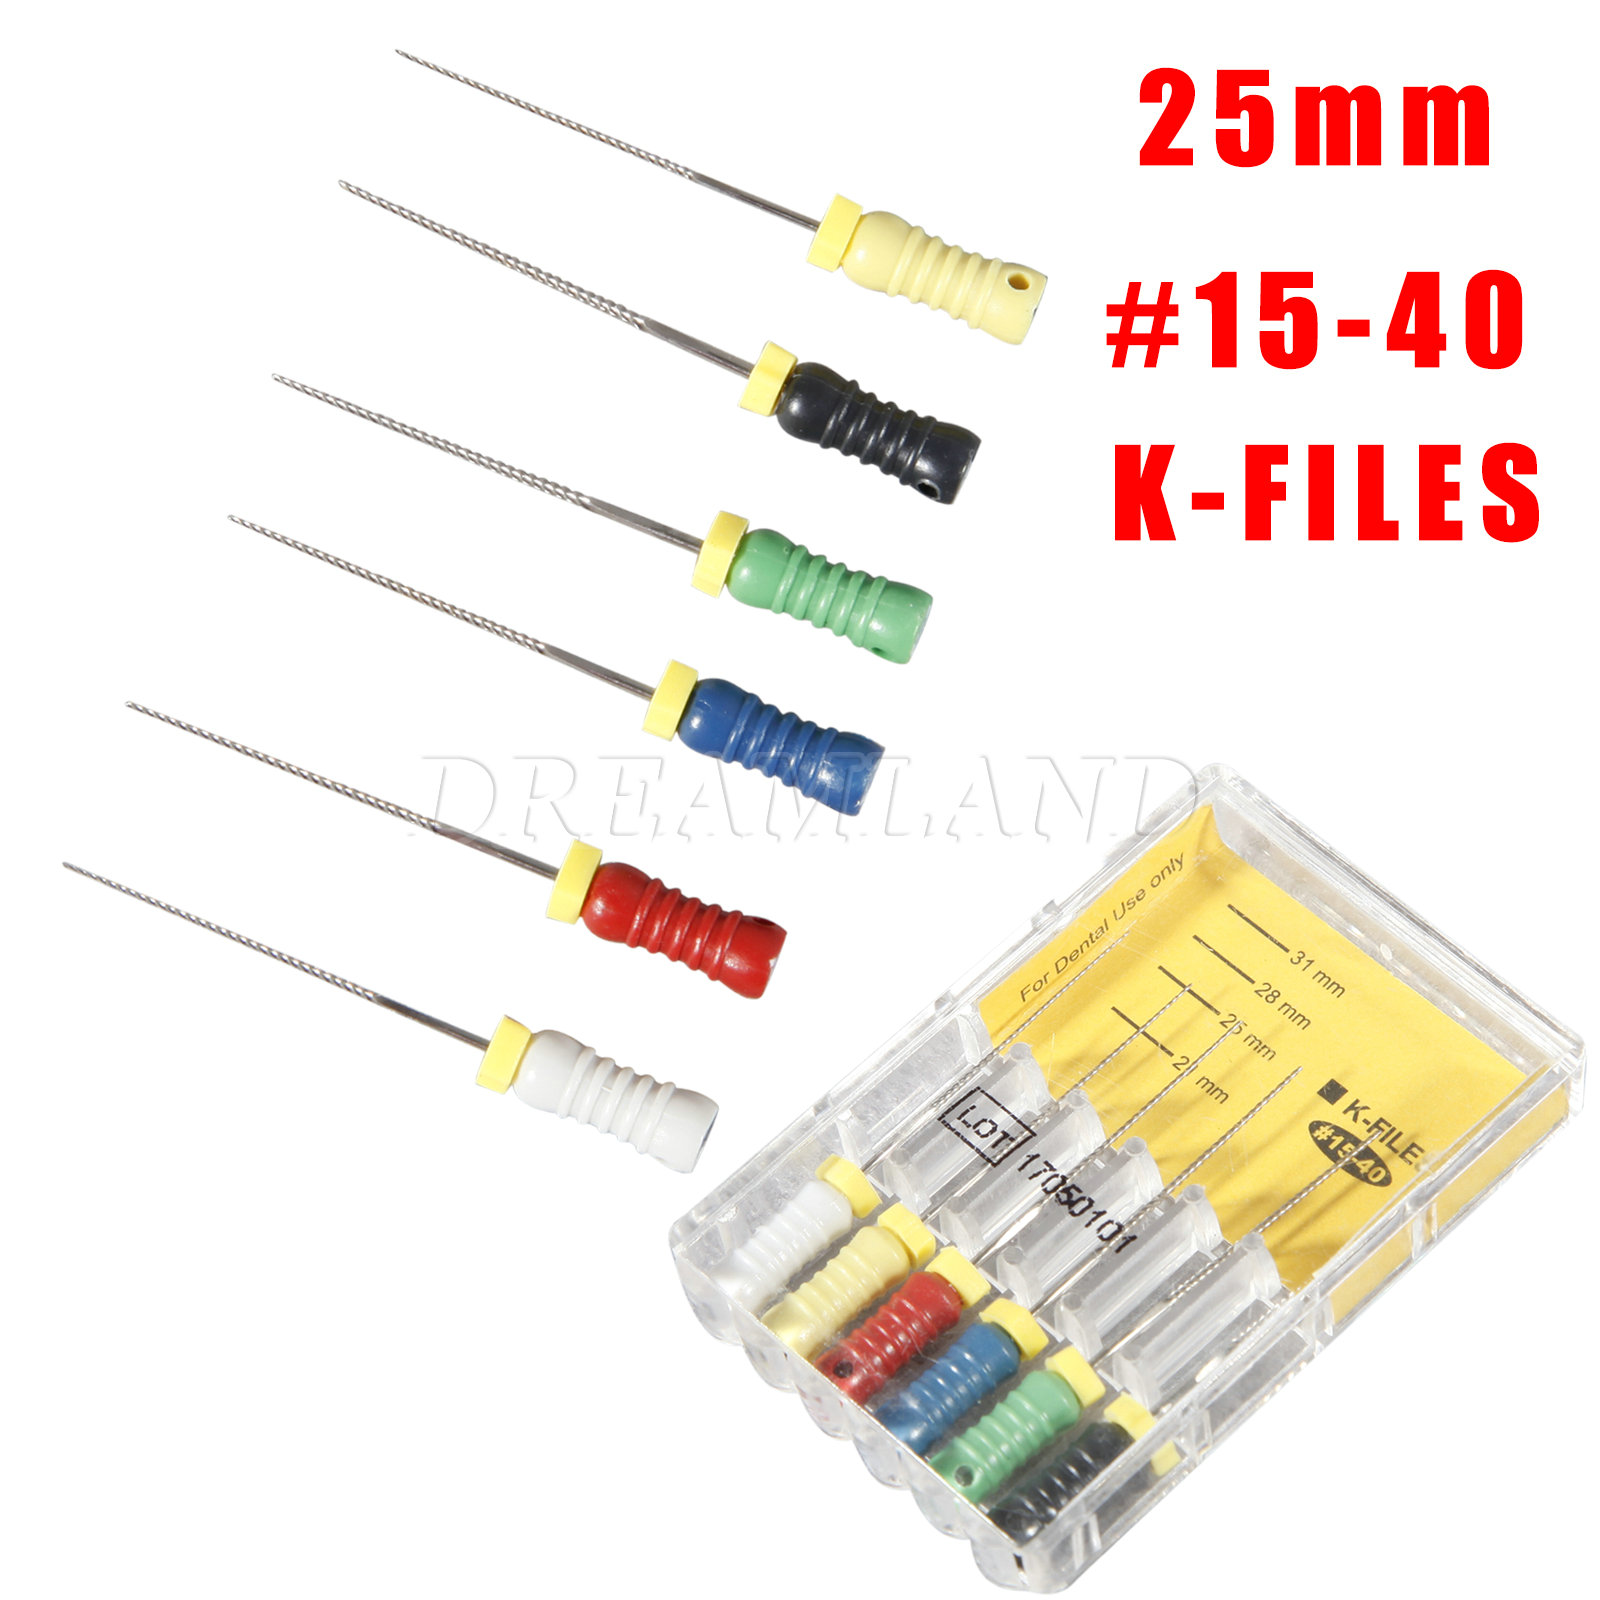 5 X Dental K-FILES 25mm #15-40 Stainless Steel Endo Root Canal File ...